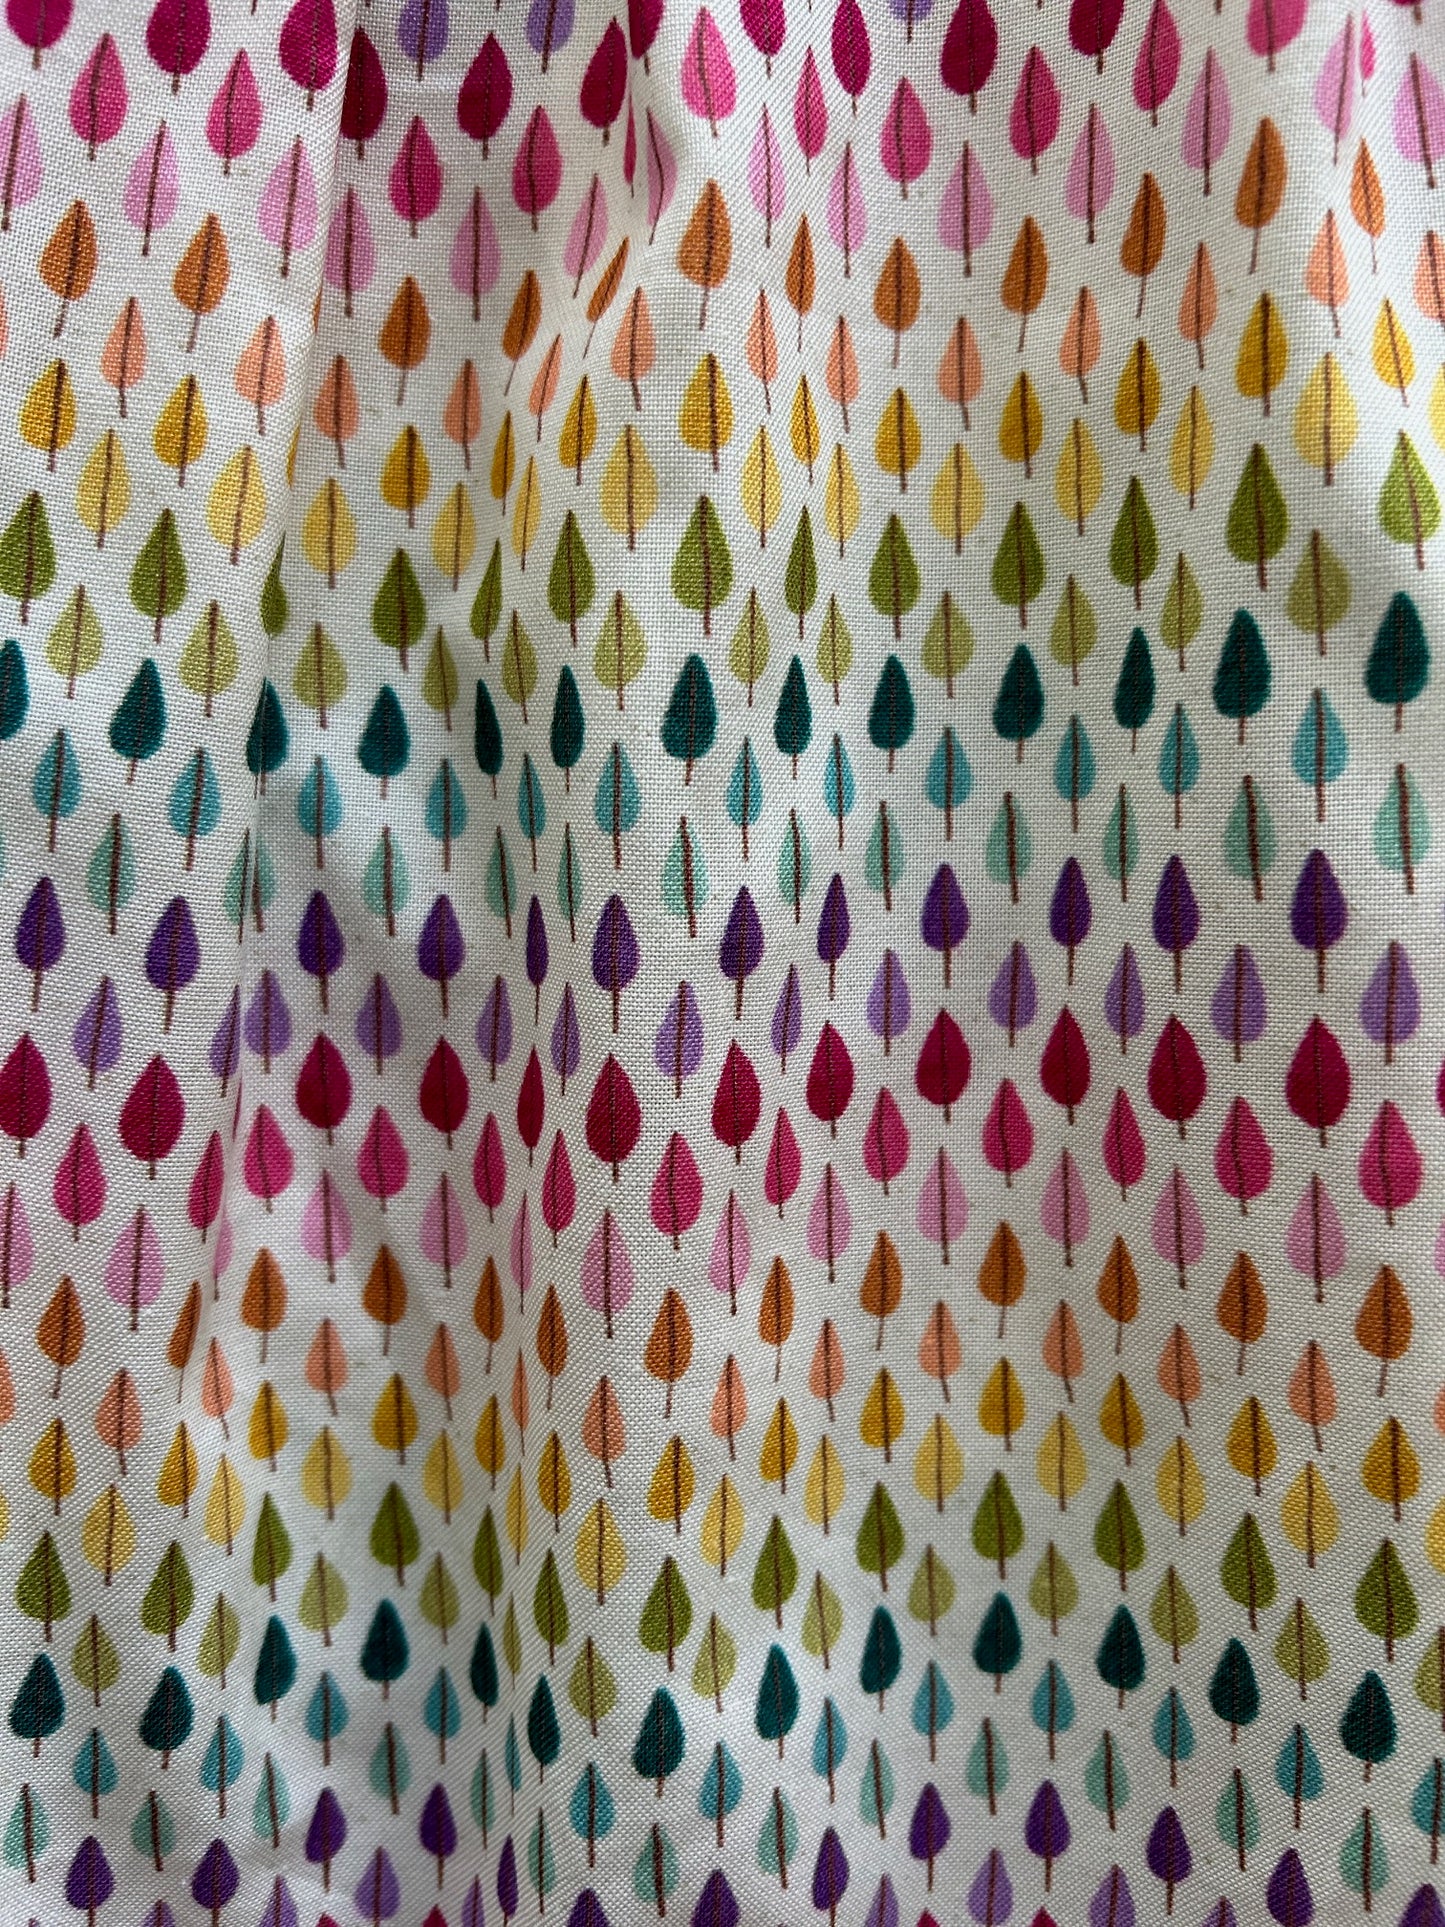 close up of fabric showing the rainbow drop print